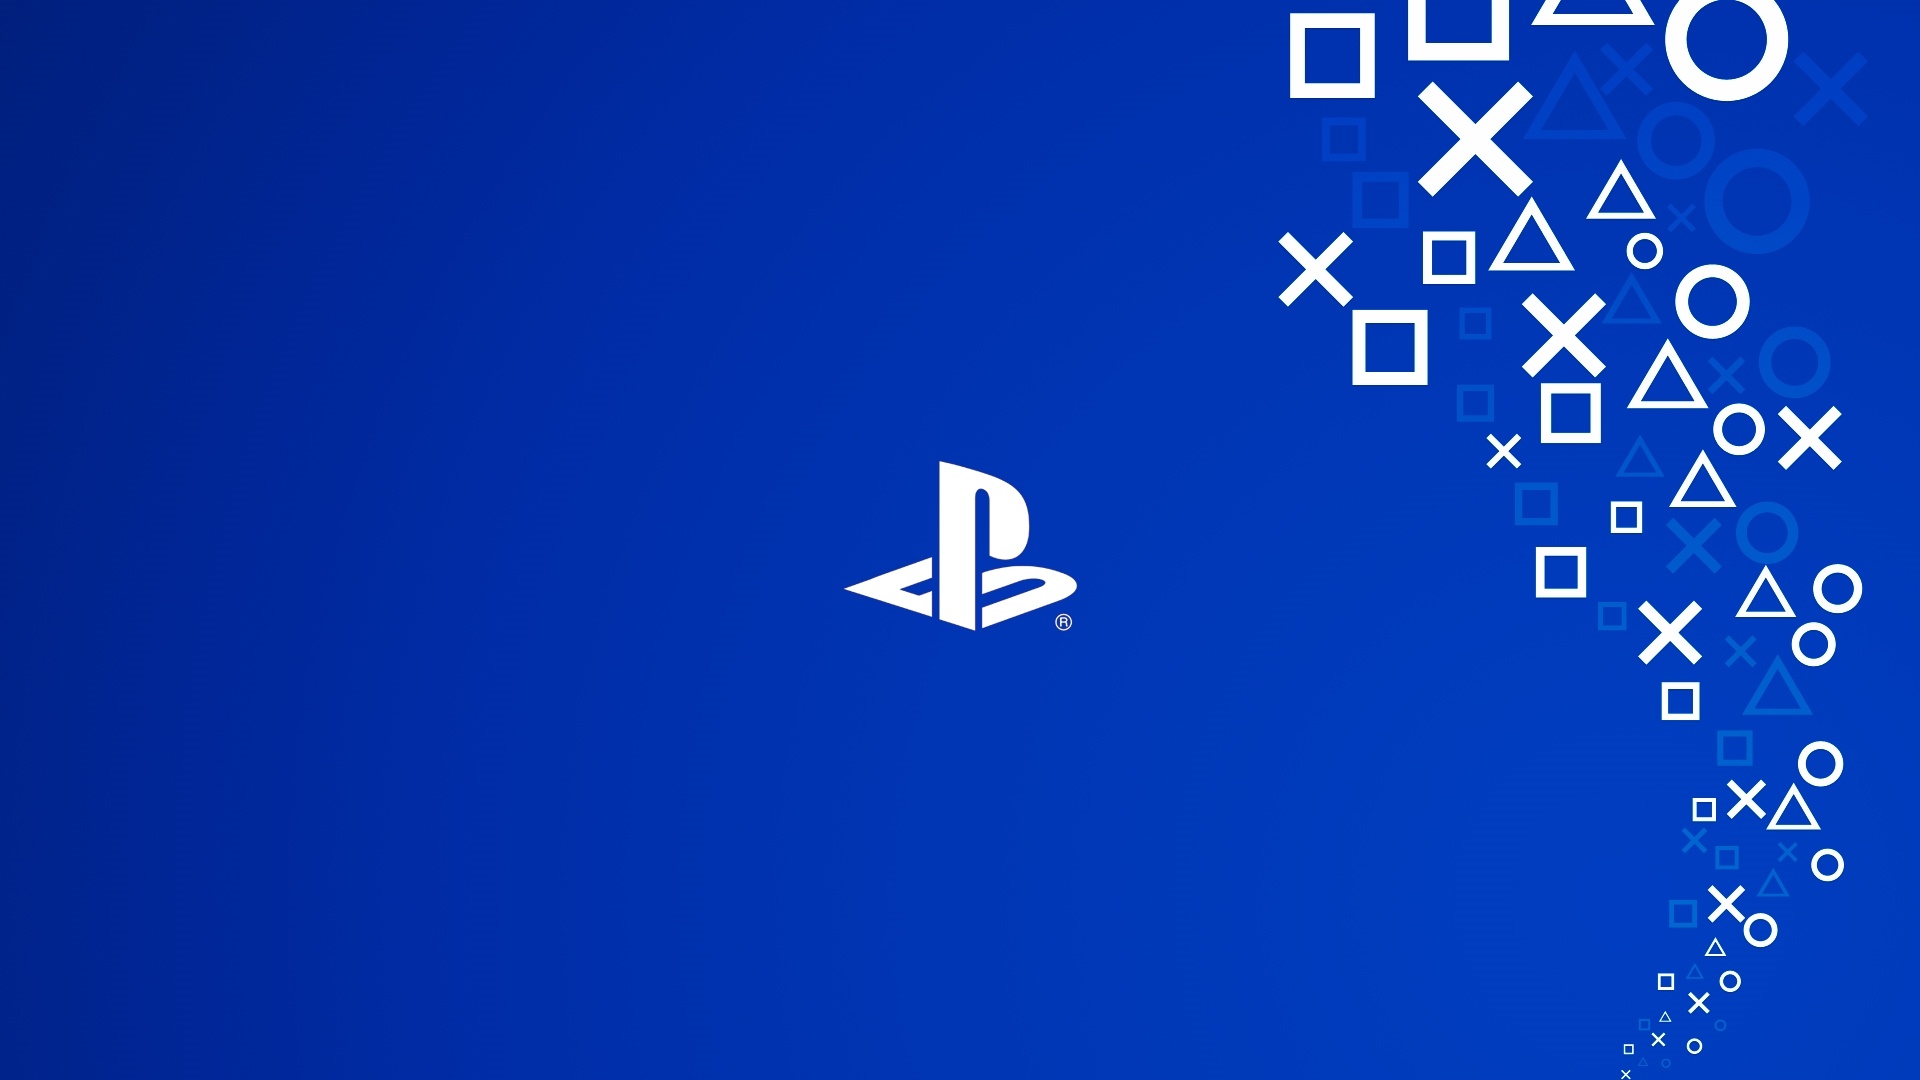 Playstation 5 Wallpapers